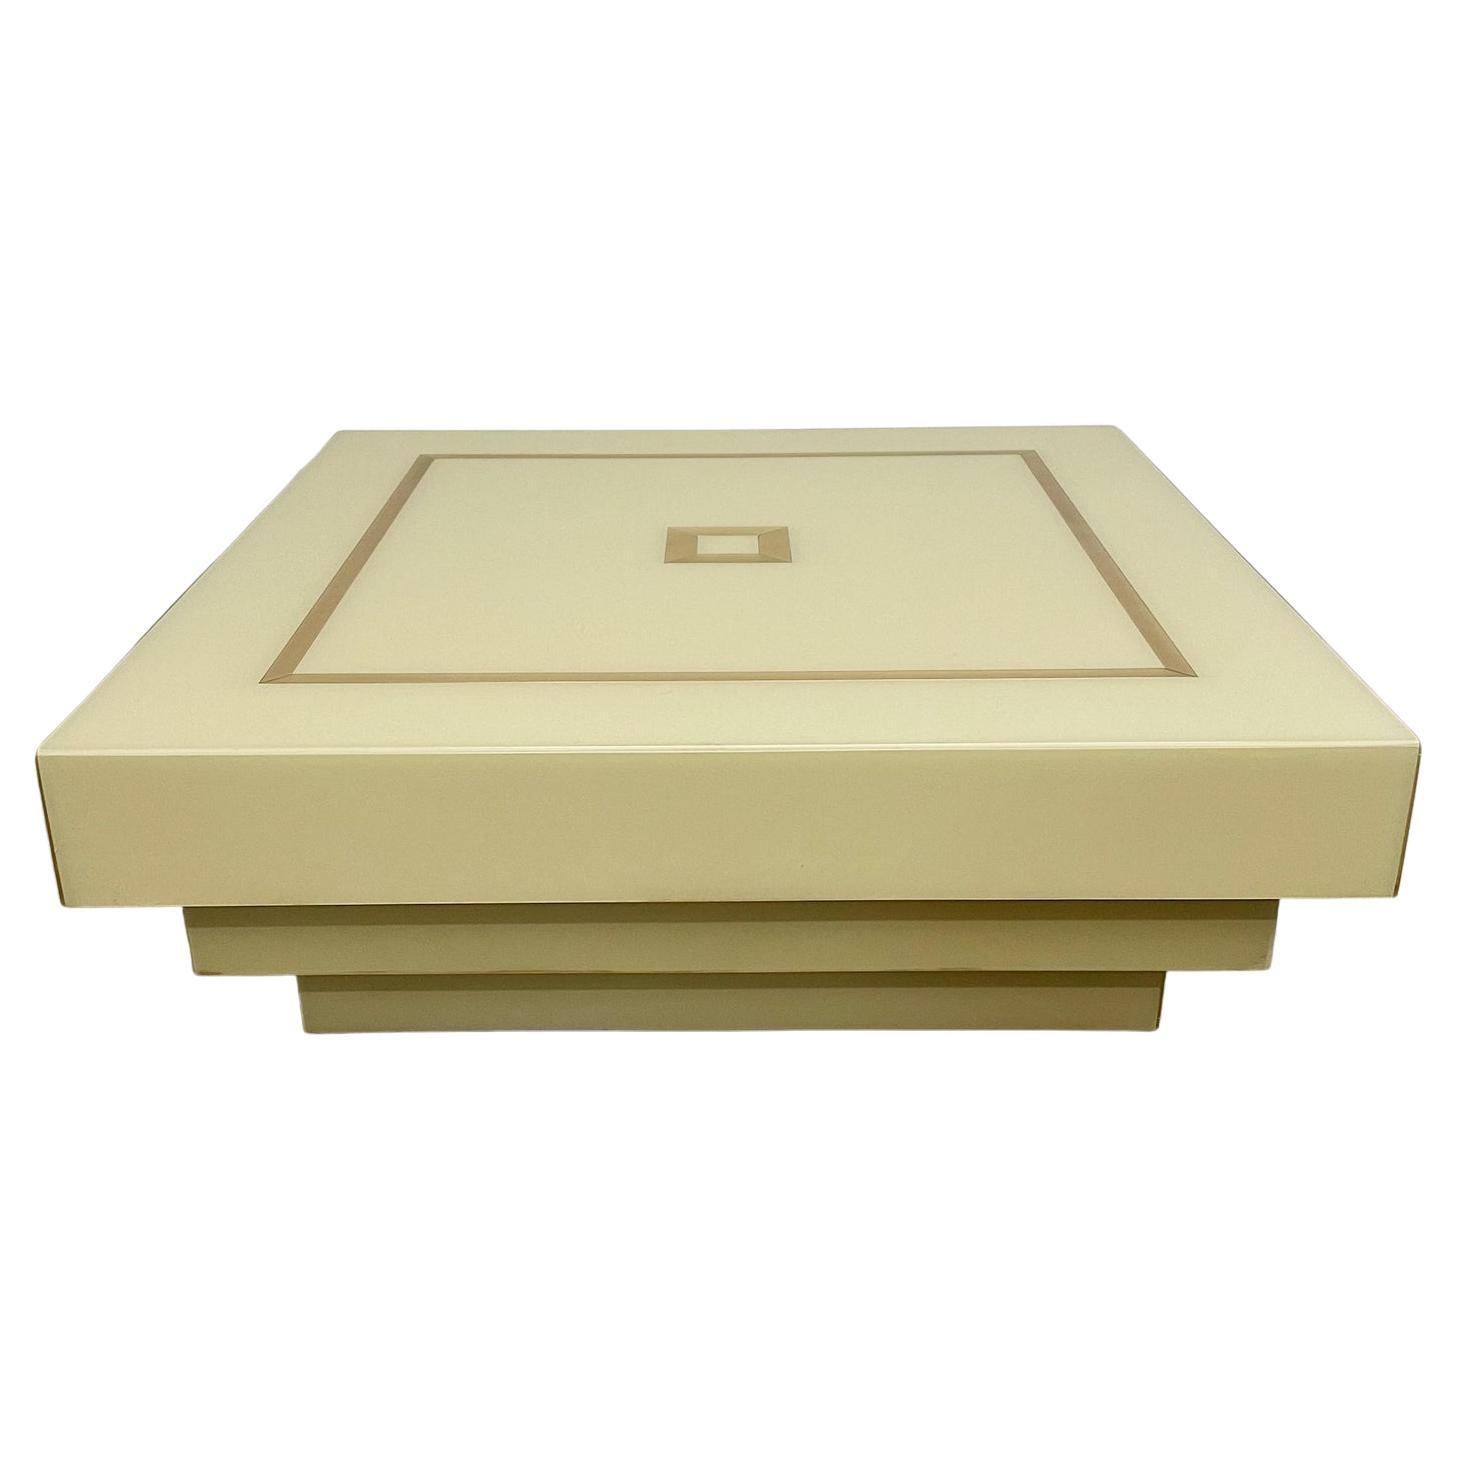 1970's Square Stepped Coffee Table with Cream Laquer and Brass Inlay For Sale